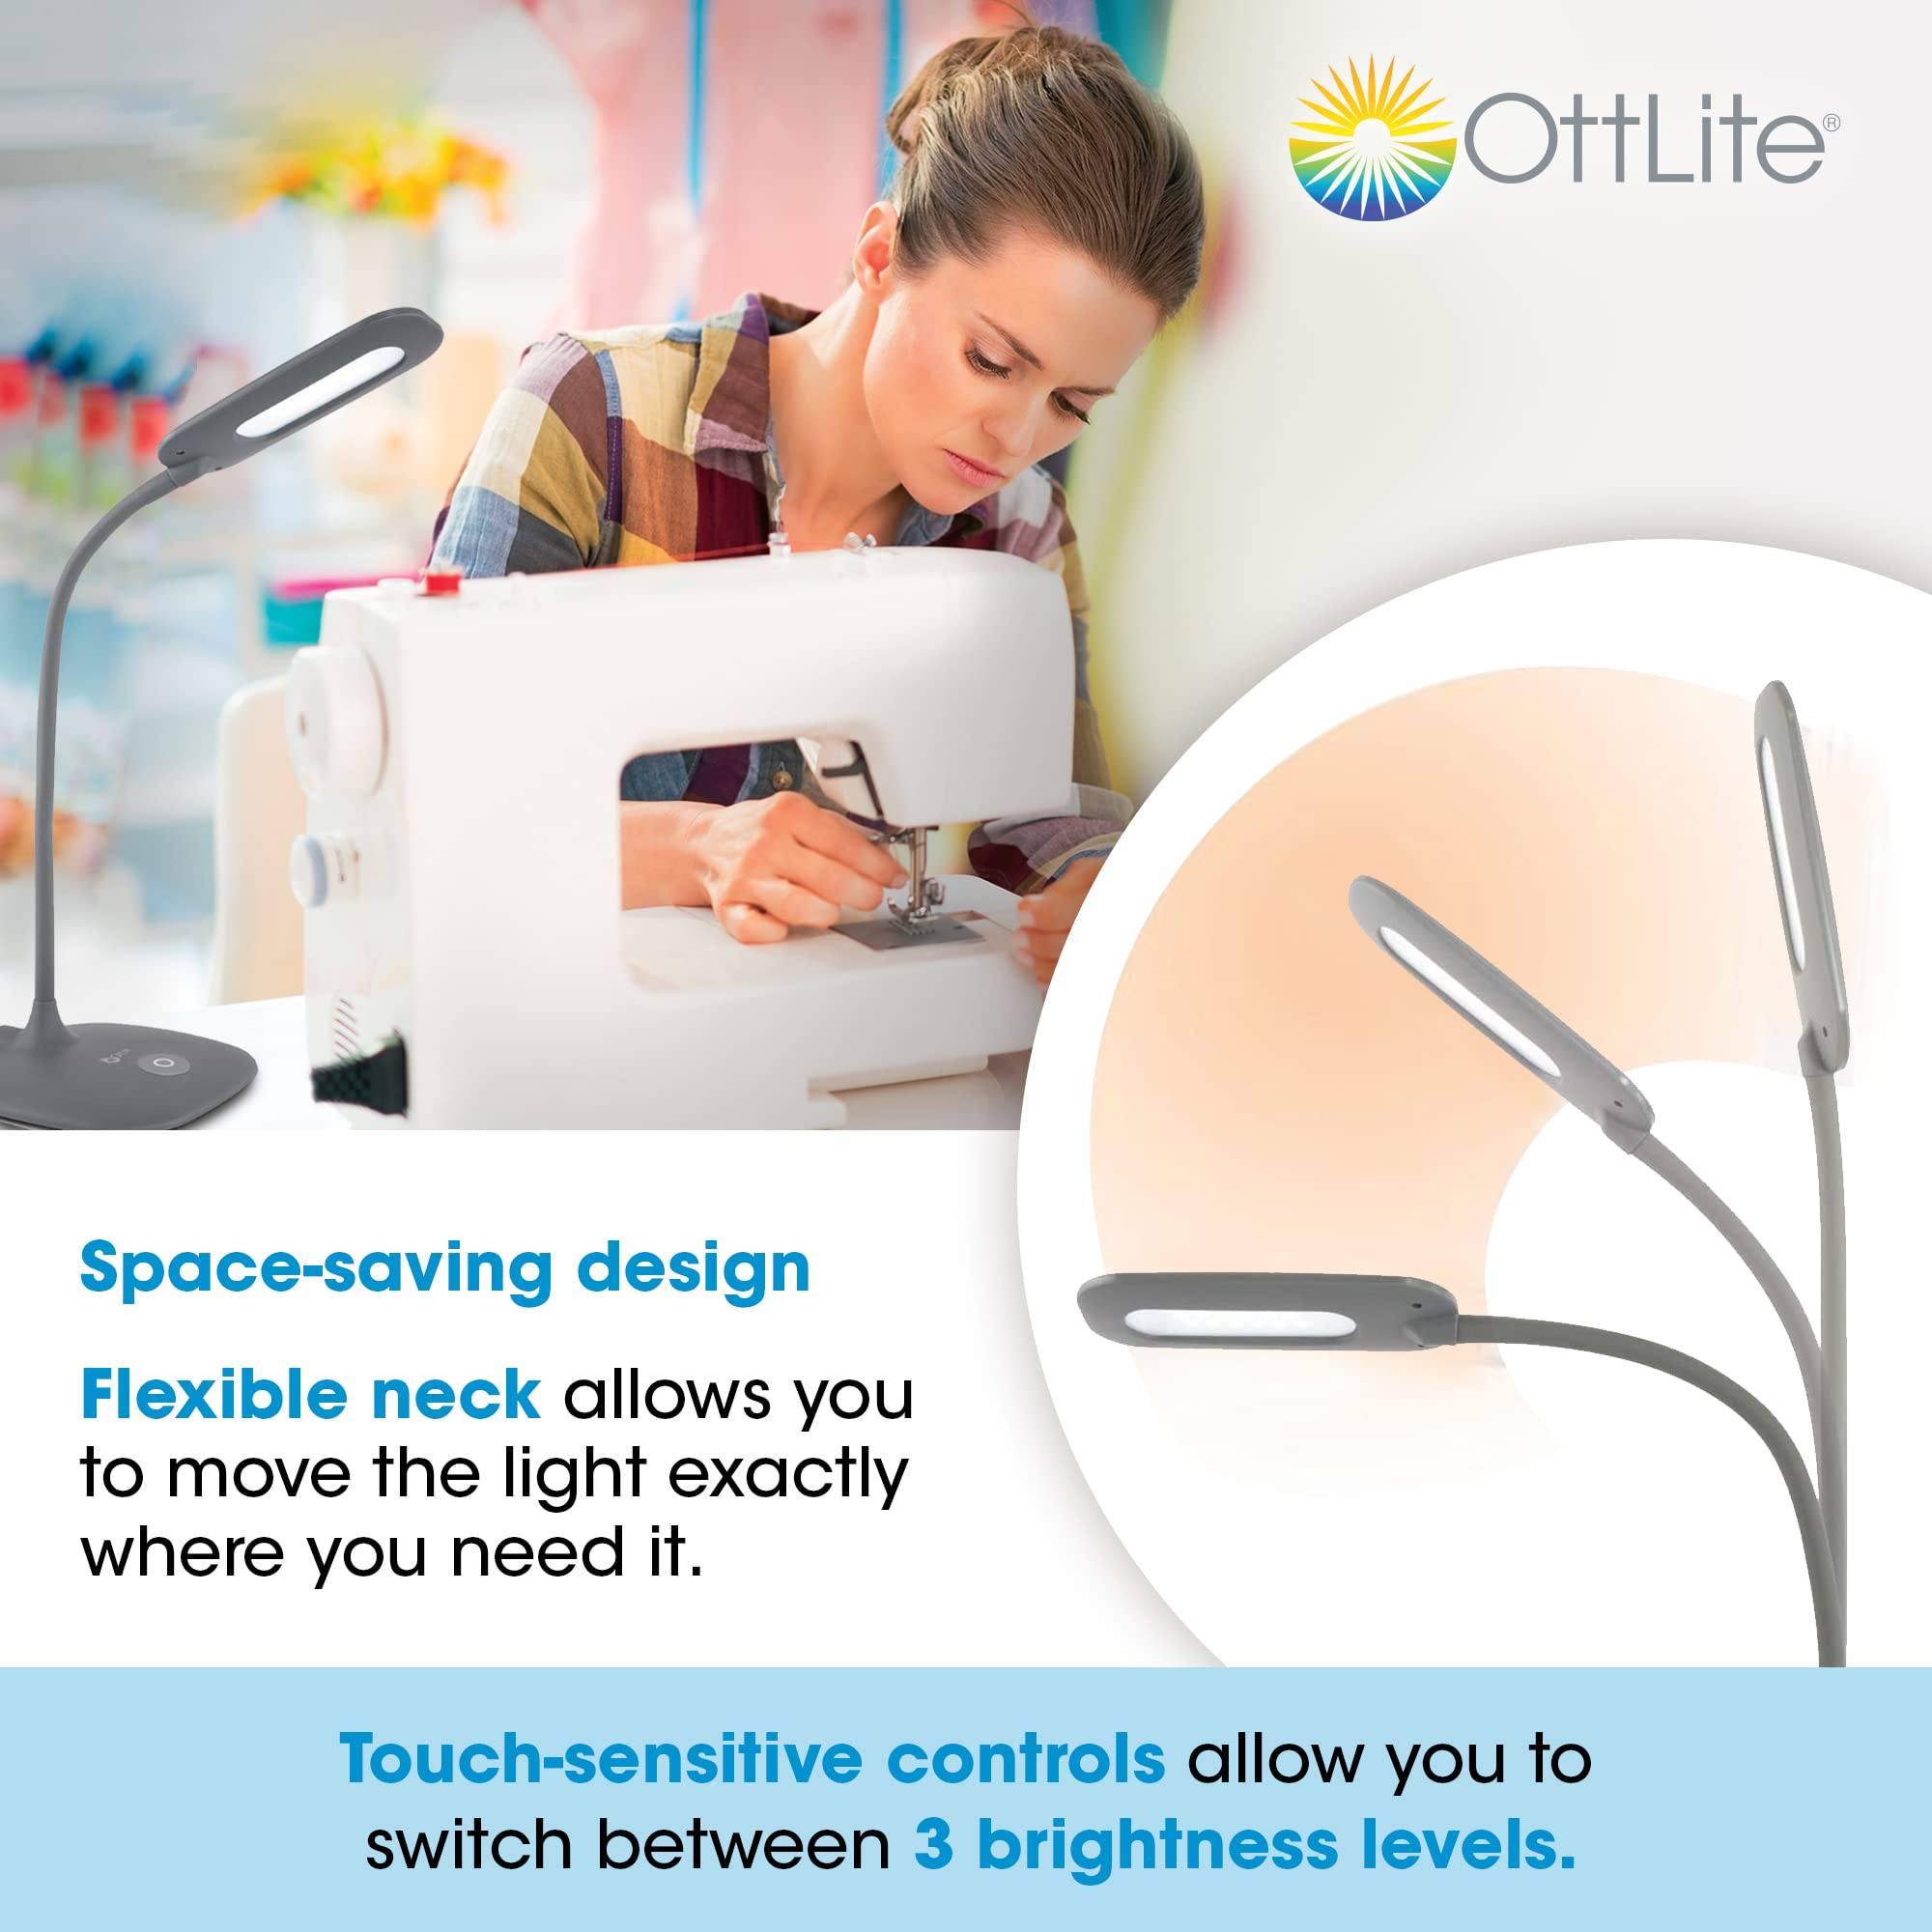 OttLite LED Soft Touch Desk Lamp - 3 Brightness Settings with Energy Efficient Natural Daylight LEDs - Adjustable Flexible Neck & Touch Controls for Tabletops, Home Office, Computer Desk, & Dorms